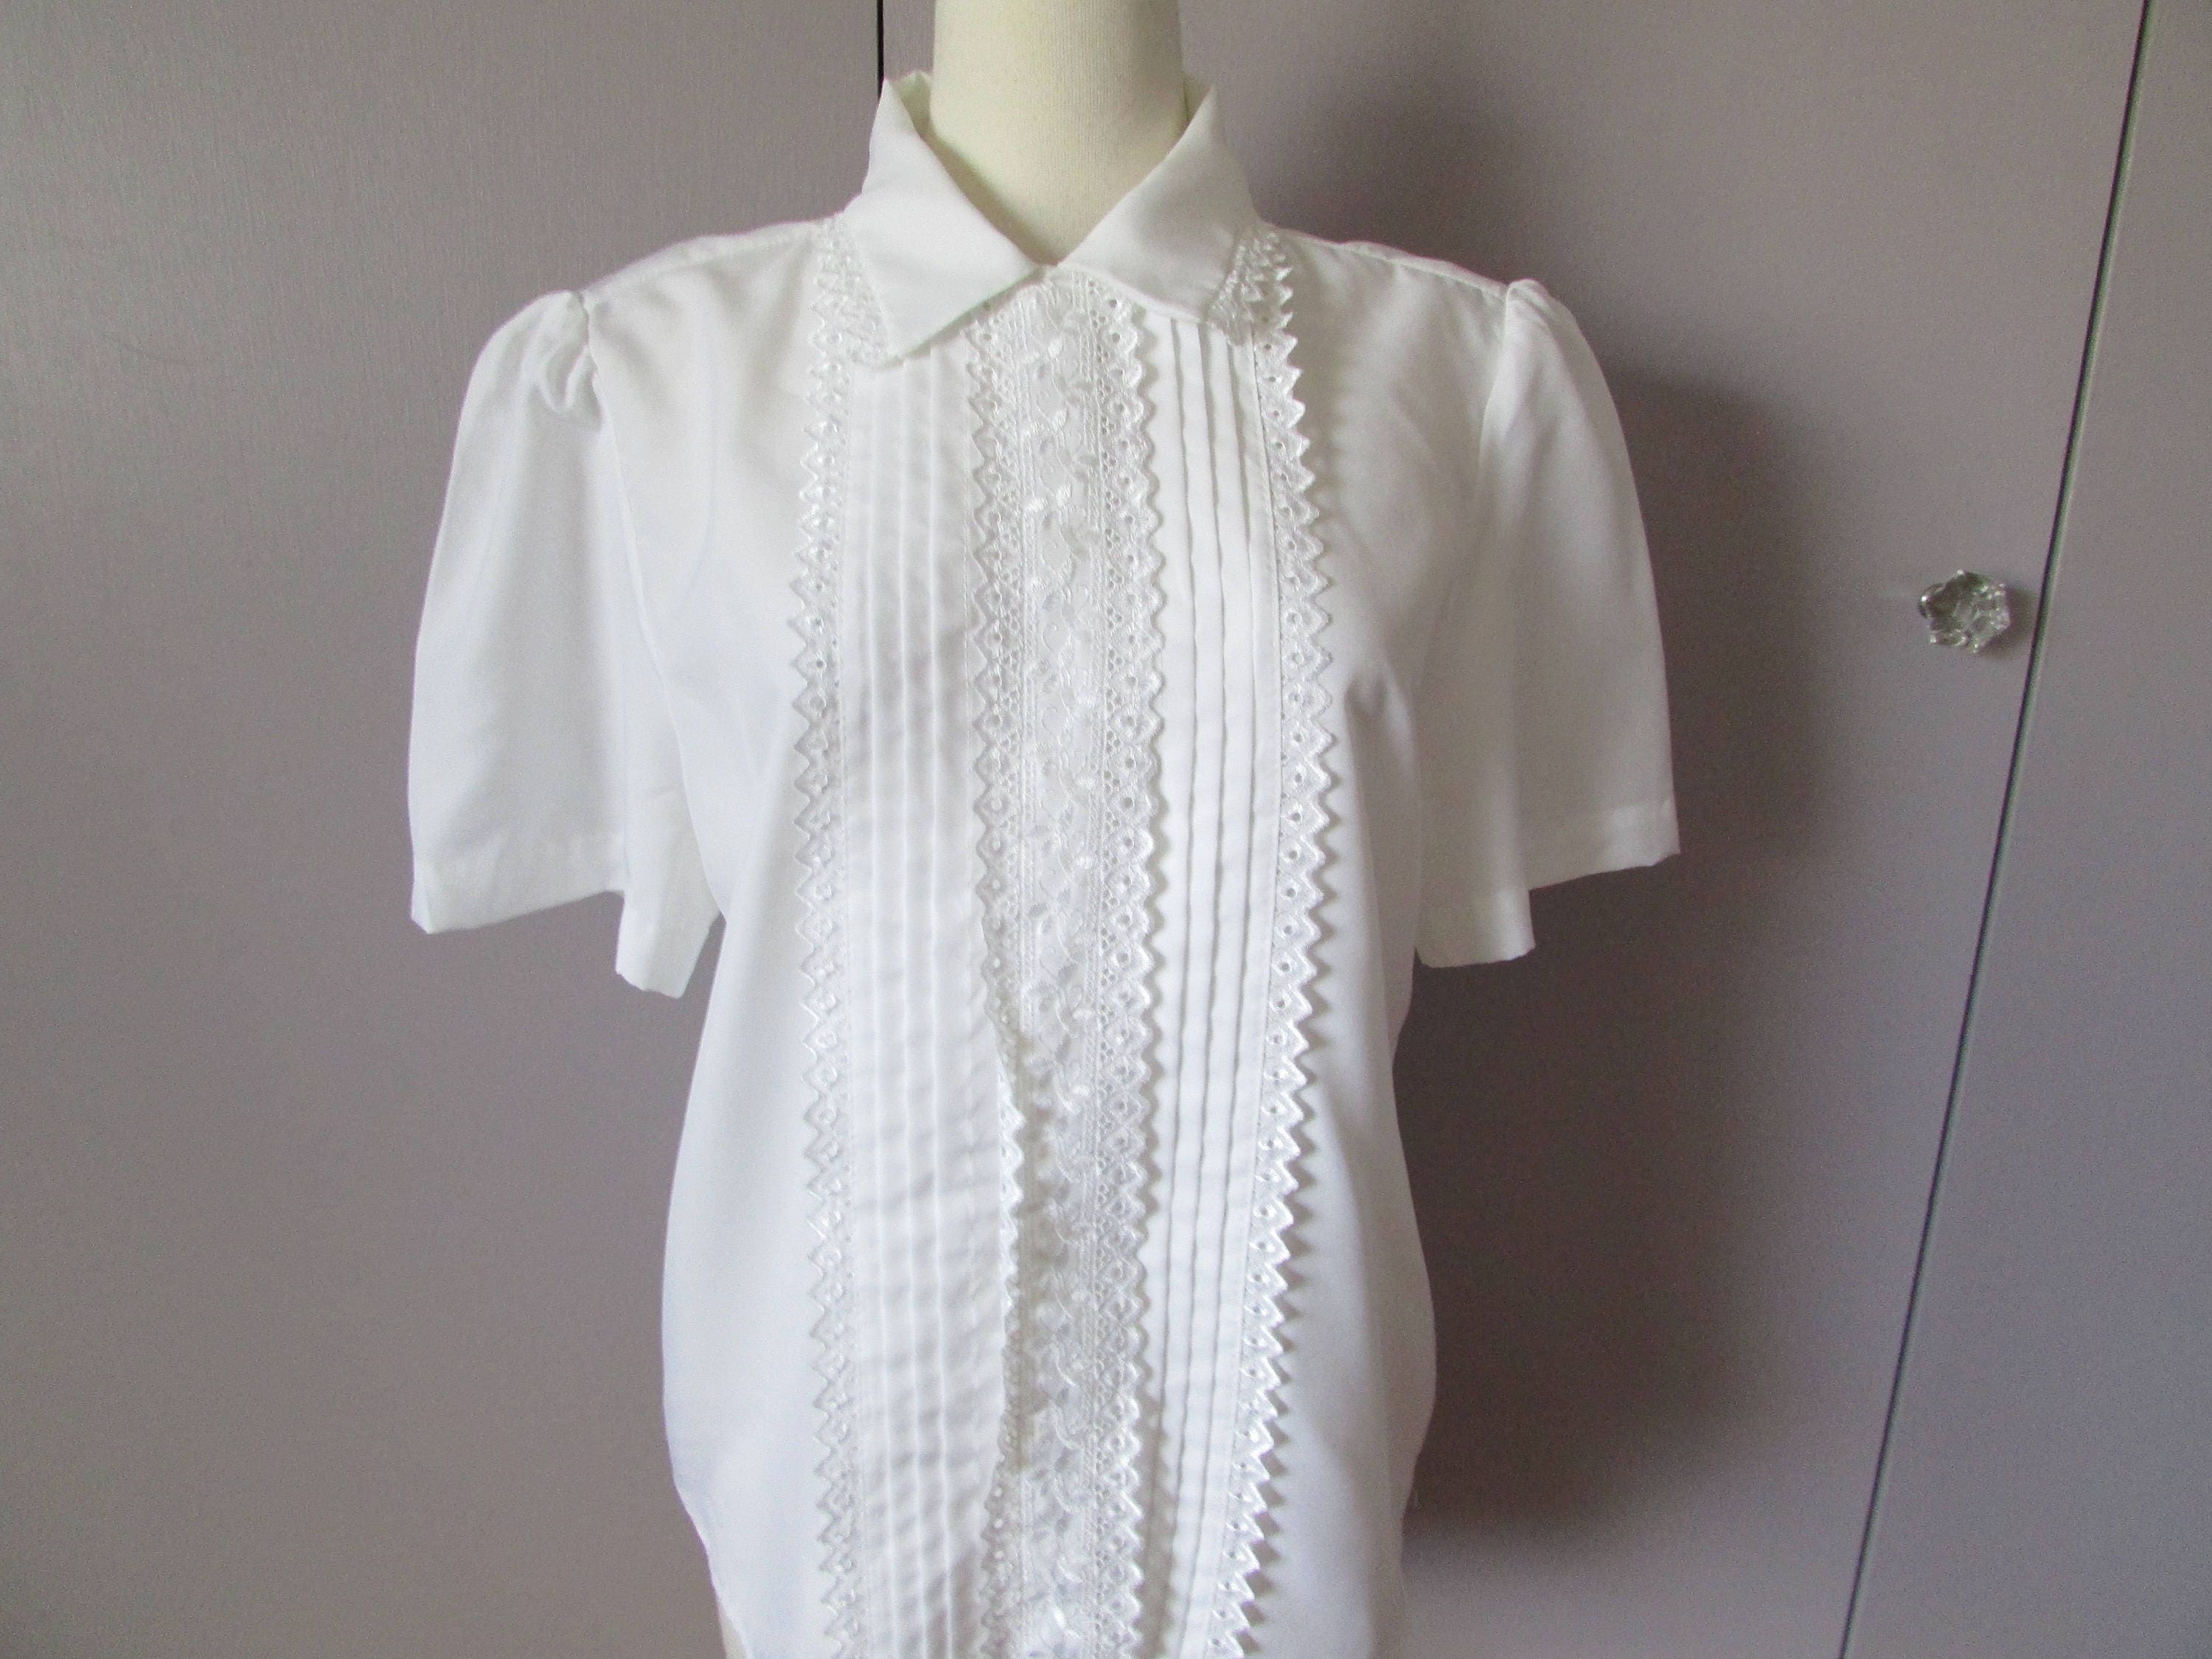 1980 Lauren Lee White and Lace Blouse - Etsy